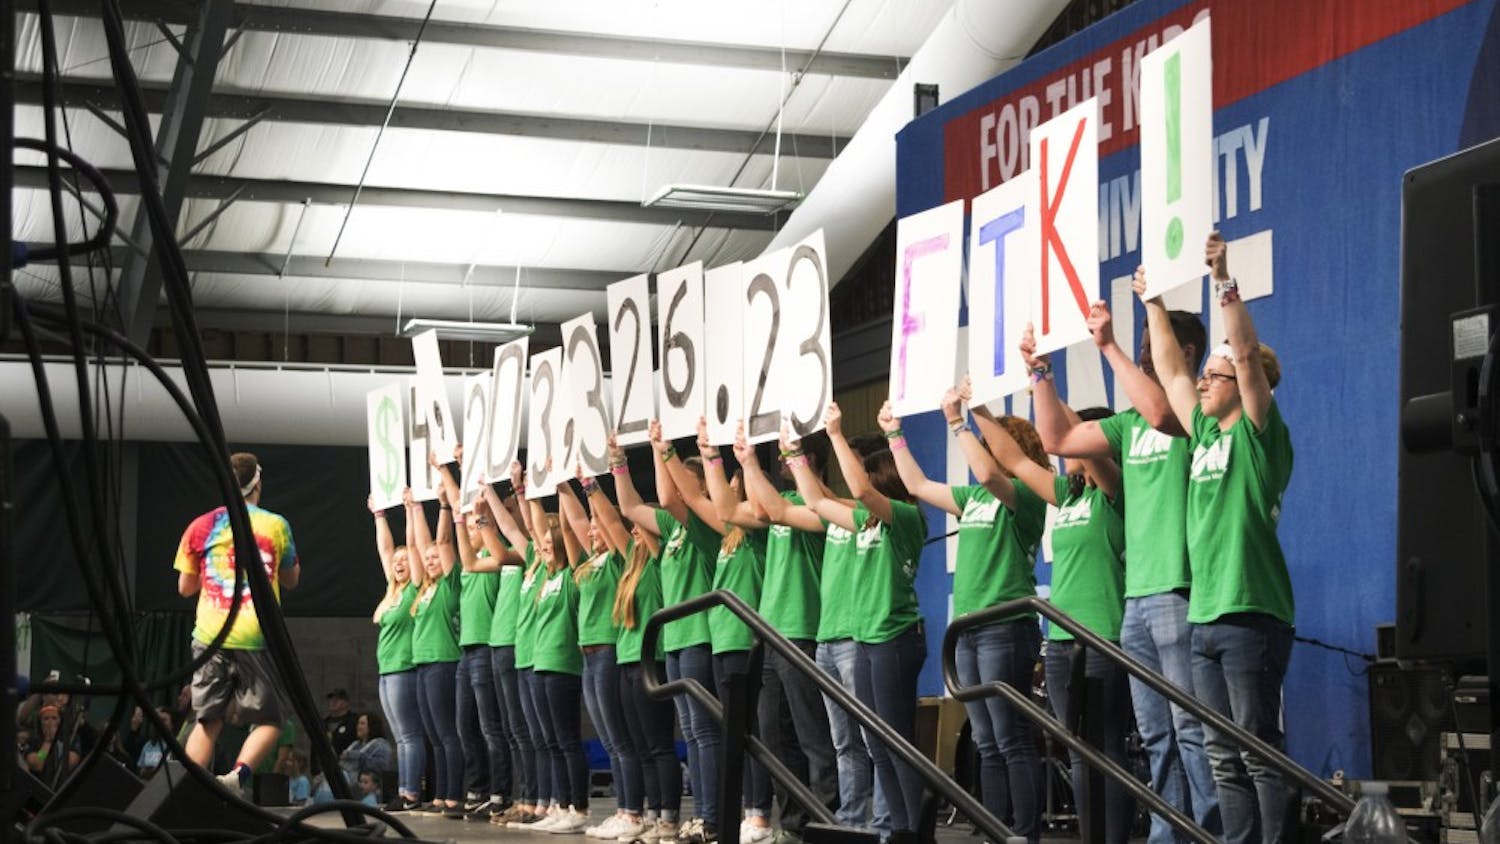 IUDM participants reveal signs displaying the total amount fundraised. The 2017 IUDM raised $4,203,326.23 for the kids.